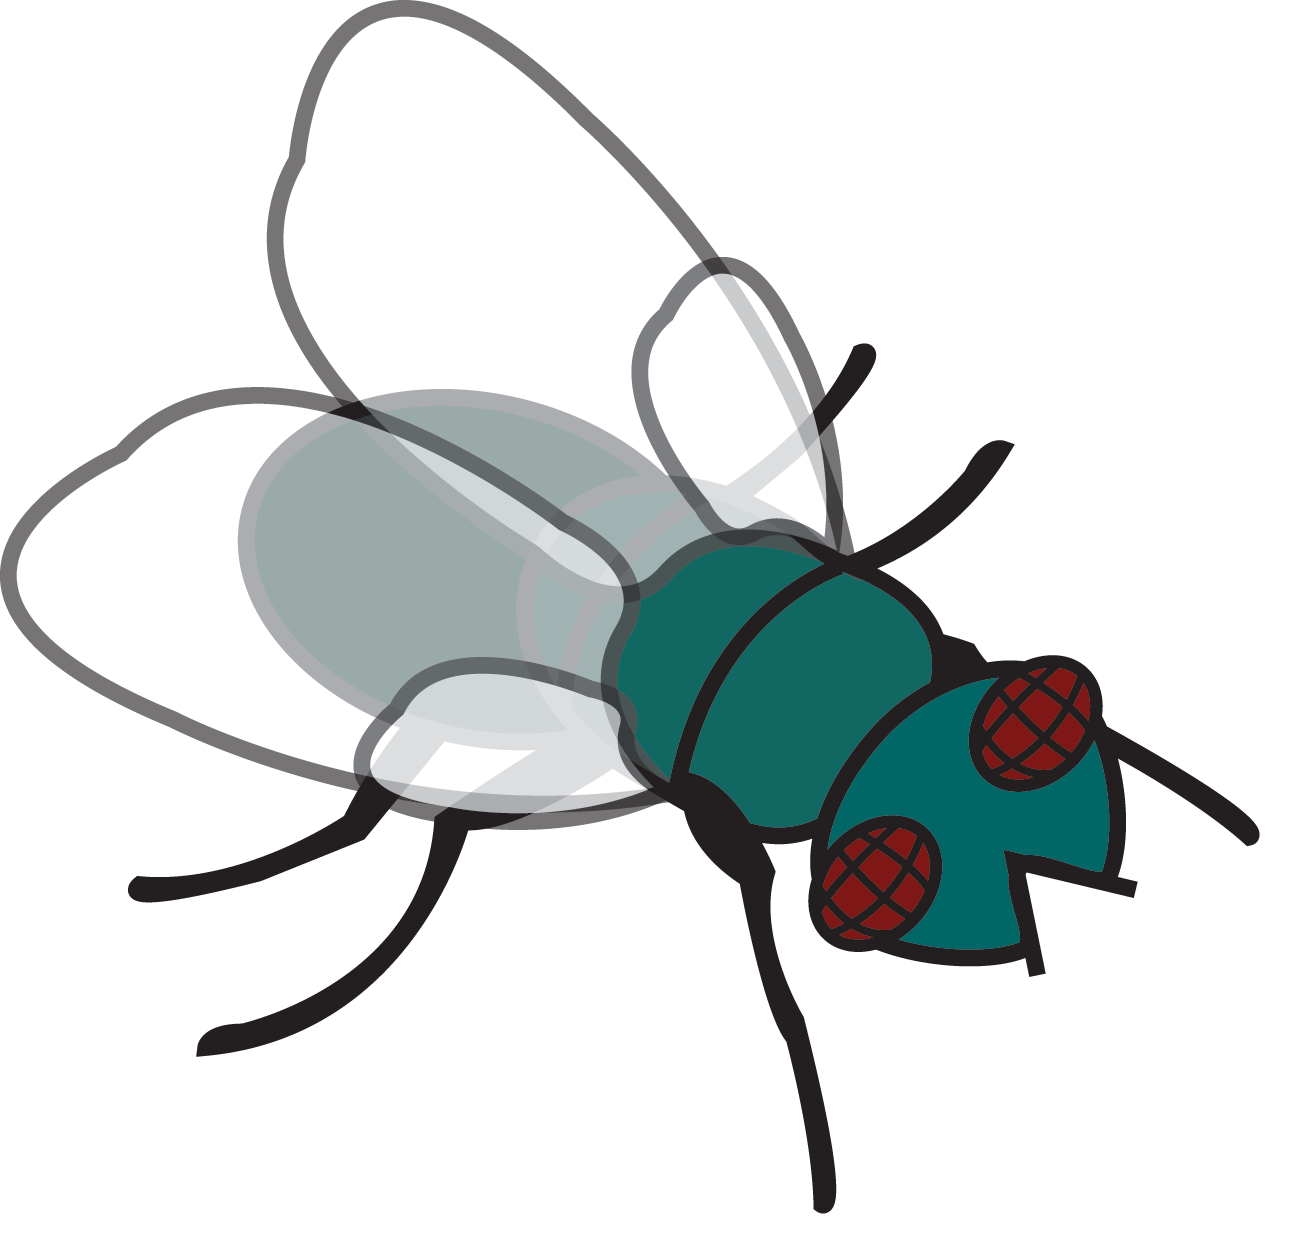 fly images clip art - photo #10